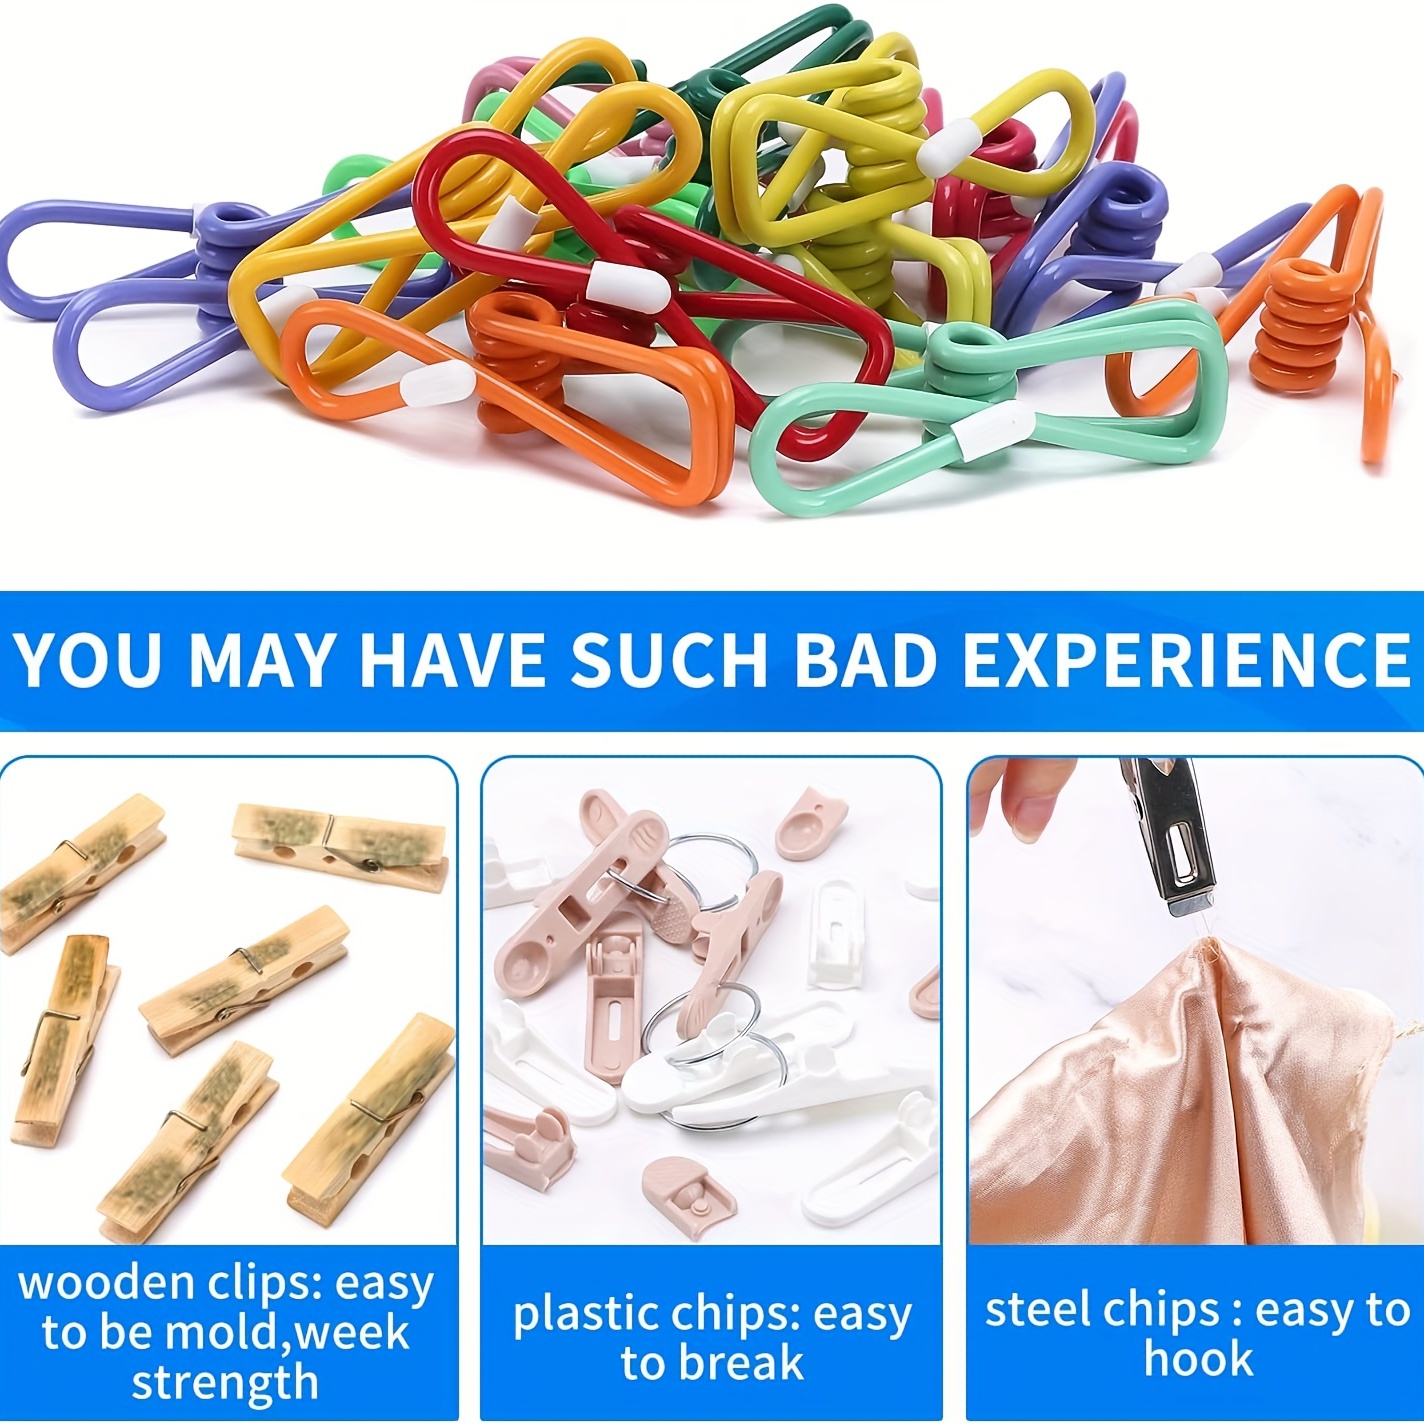  Chip Clips, Utility PVC-Coated Steel Clip for Food